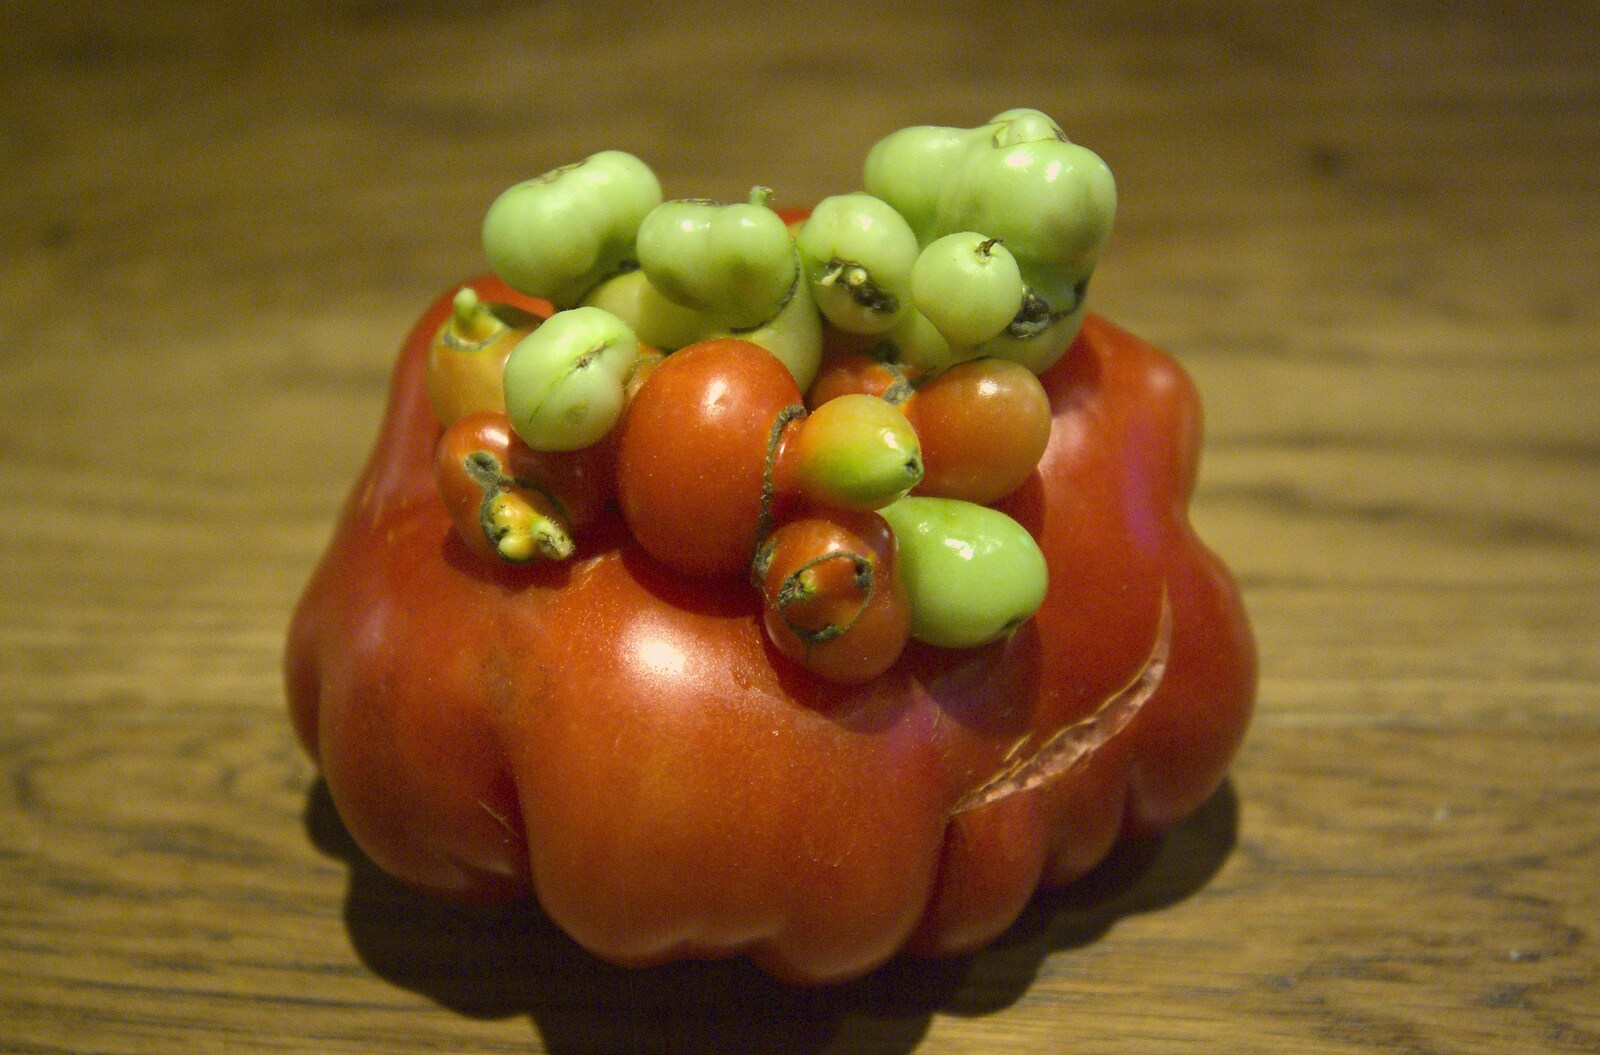 A Day in Dun Laoghaire, County Dublin, Ireland - 3rd September 2010: A mutant tomato is picked